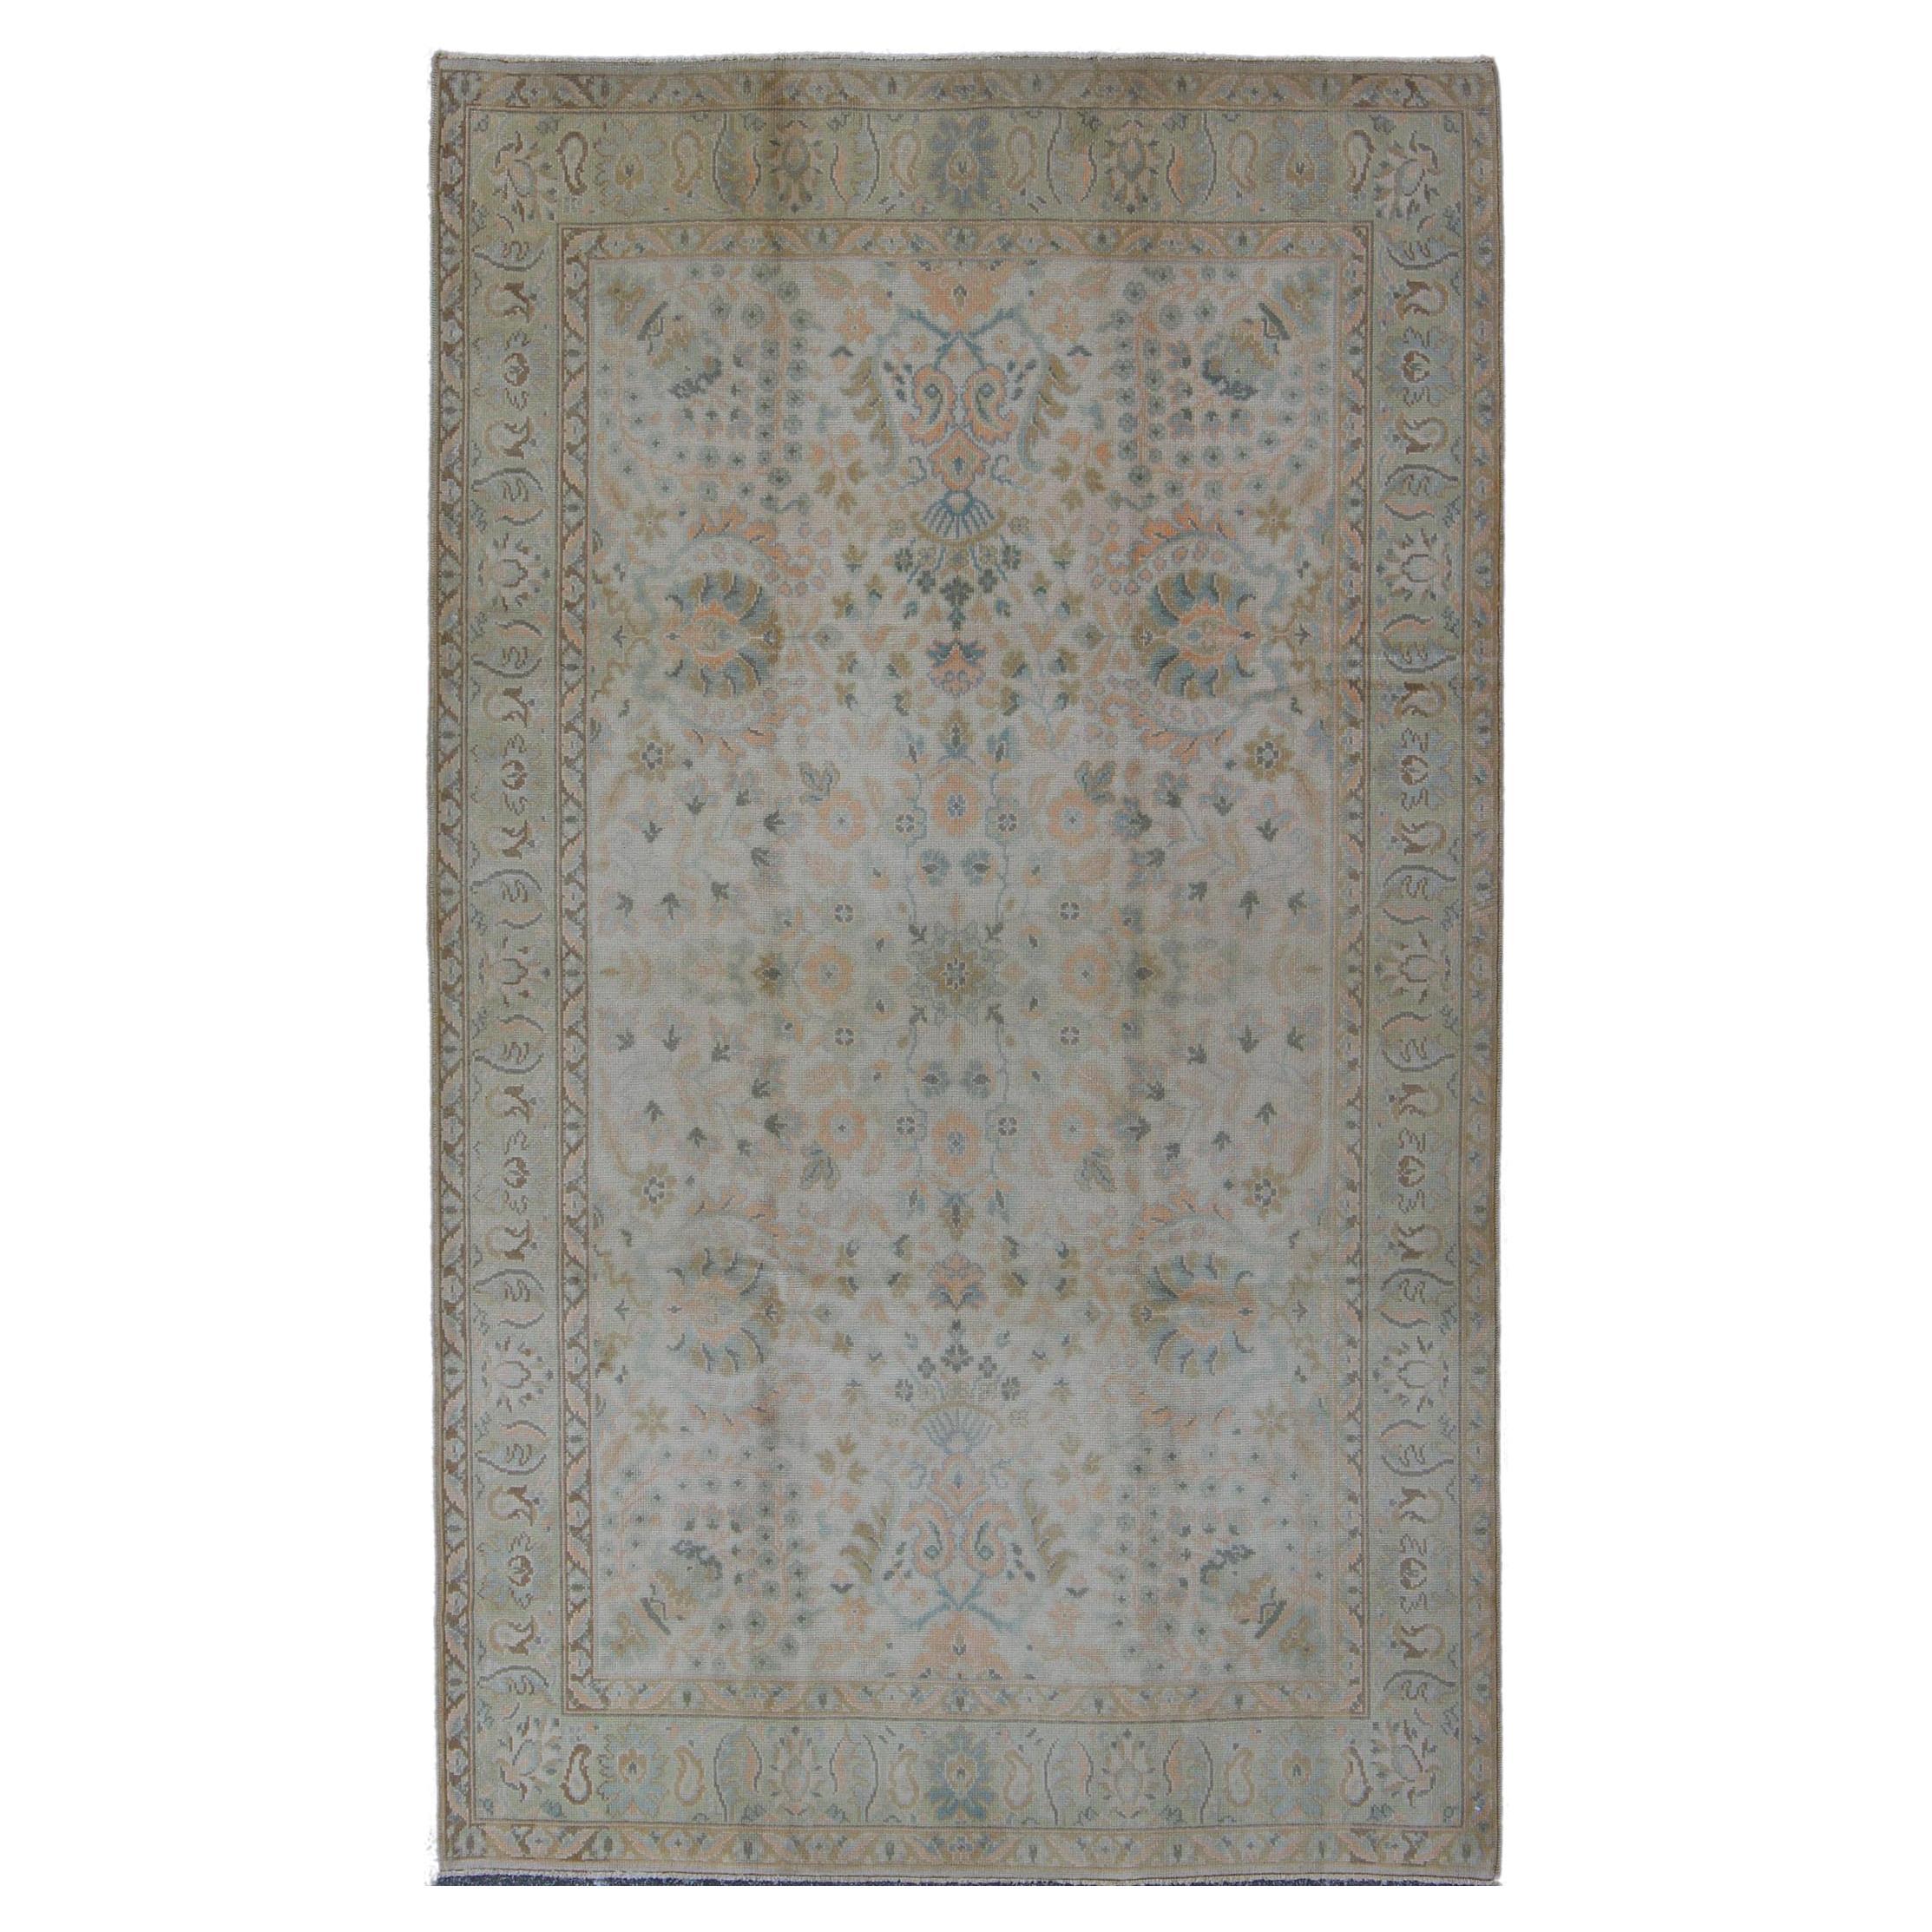 Neutral Vintage Turkish Oushak Rug with Floral Design and Repeated Floral Motifs